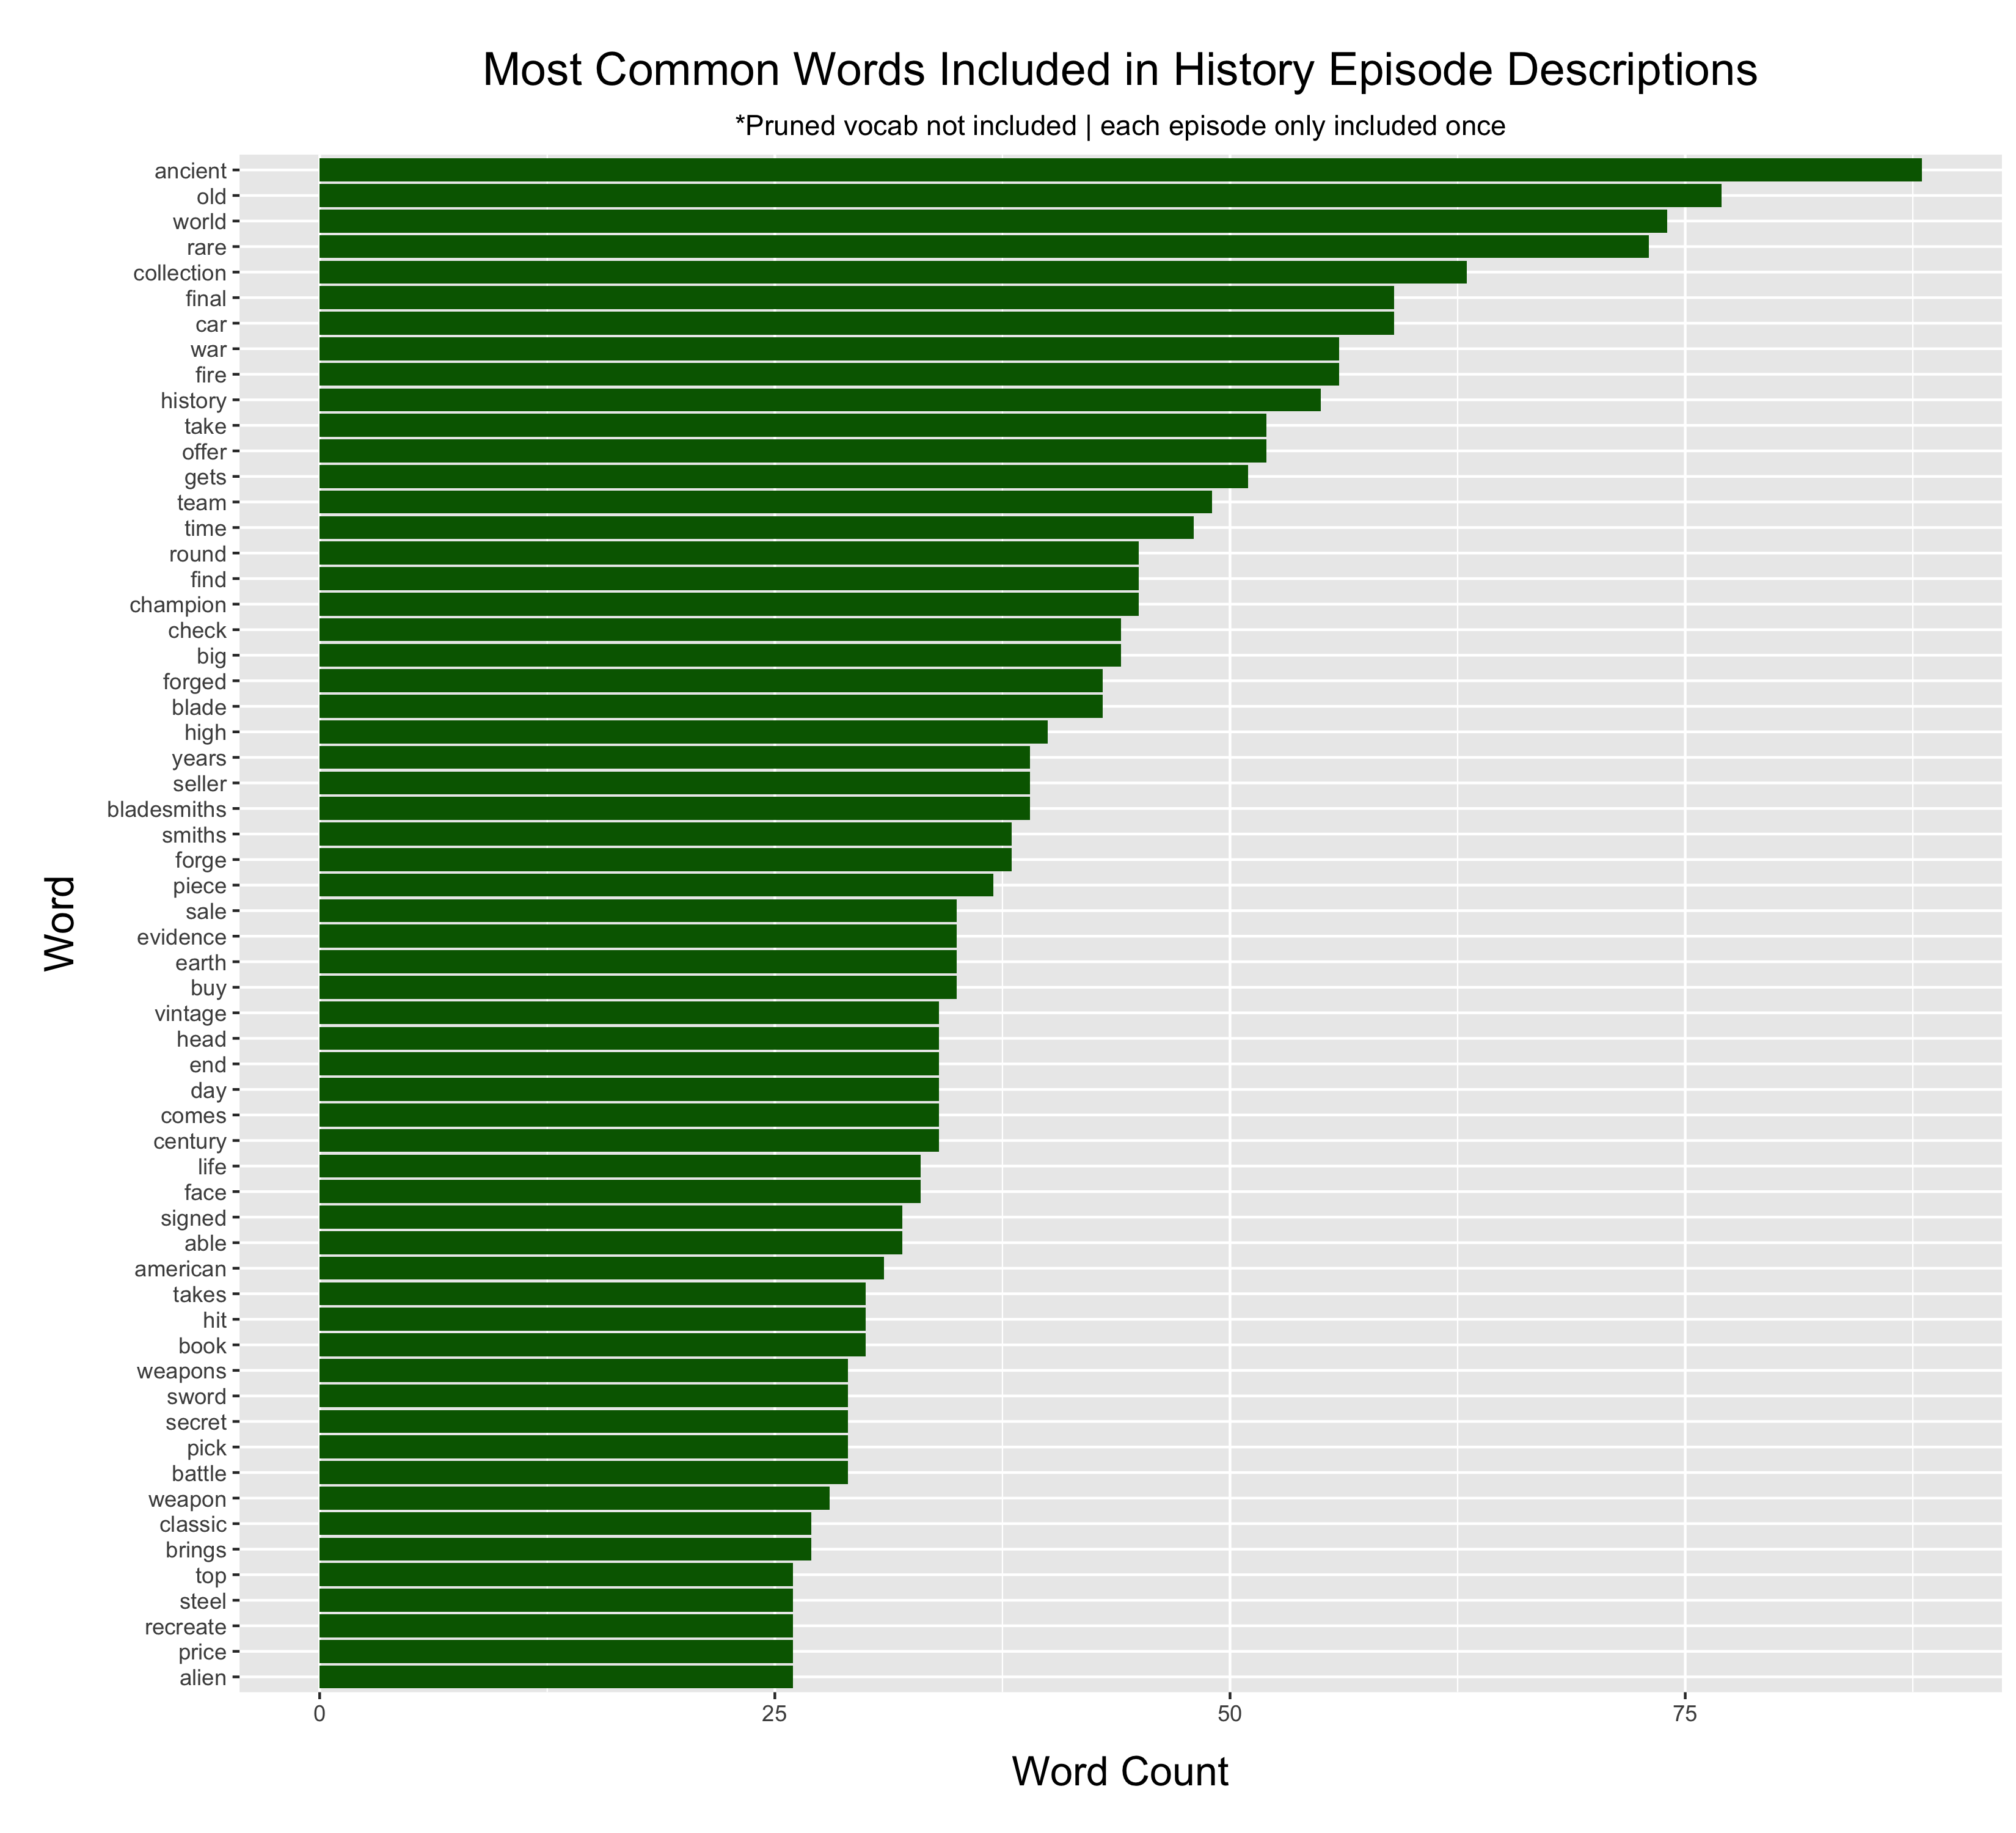 A chart of the most frequently used words in episode descriptions and titles on History. The most frequently used were “ancient,” “old,” “world,” “rare,”
“collection,” “final,” “car,” “war,” “fire,” “history,” “take,” “offer,” and “gets.”